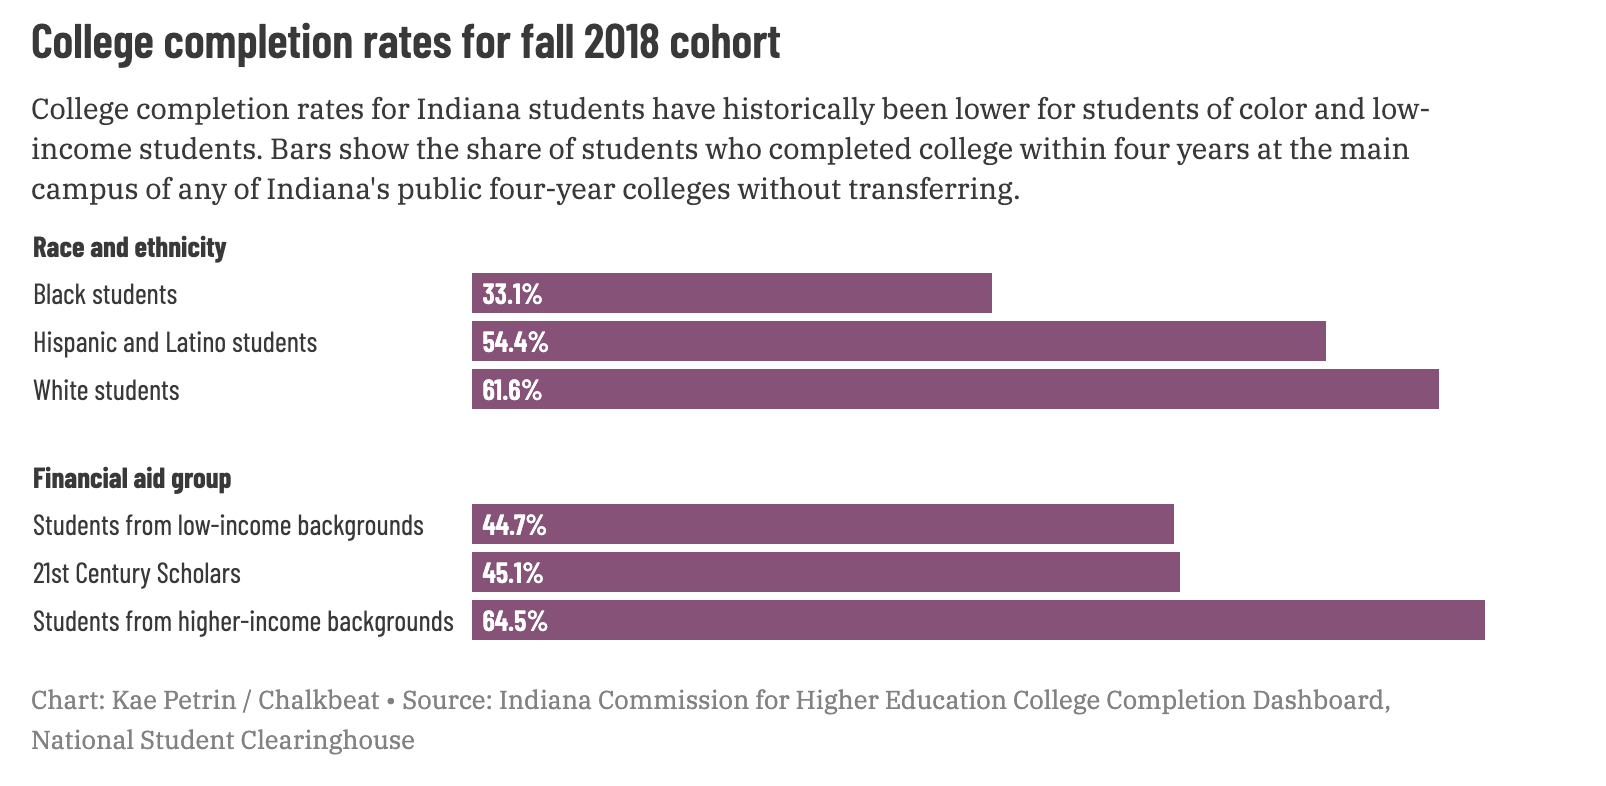 Graph showing results for “College completion rates for fall 2018 cohort”